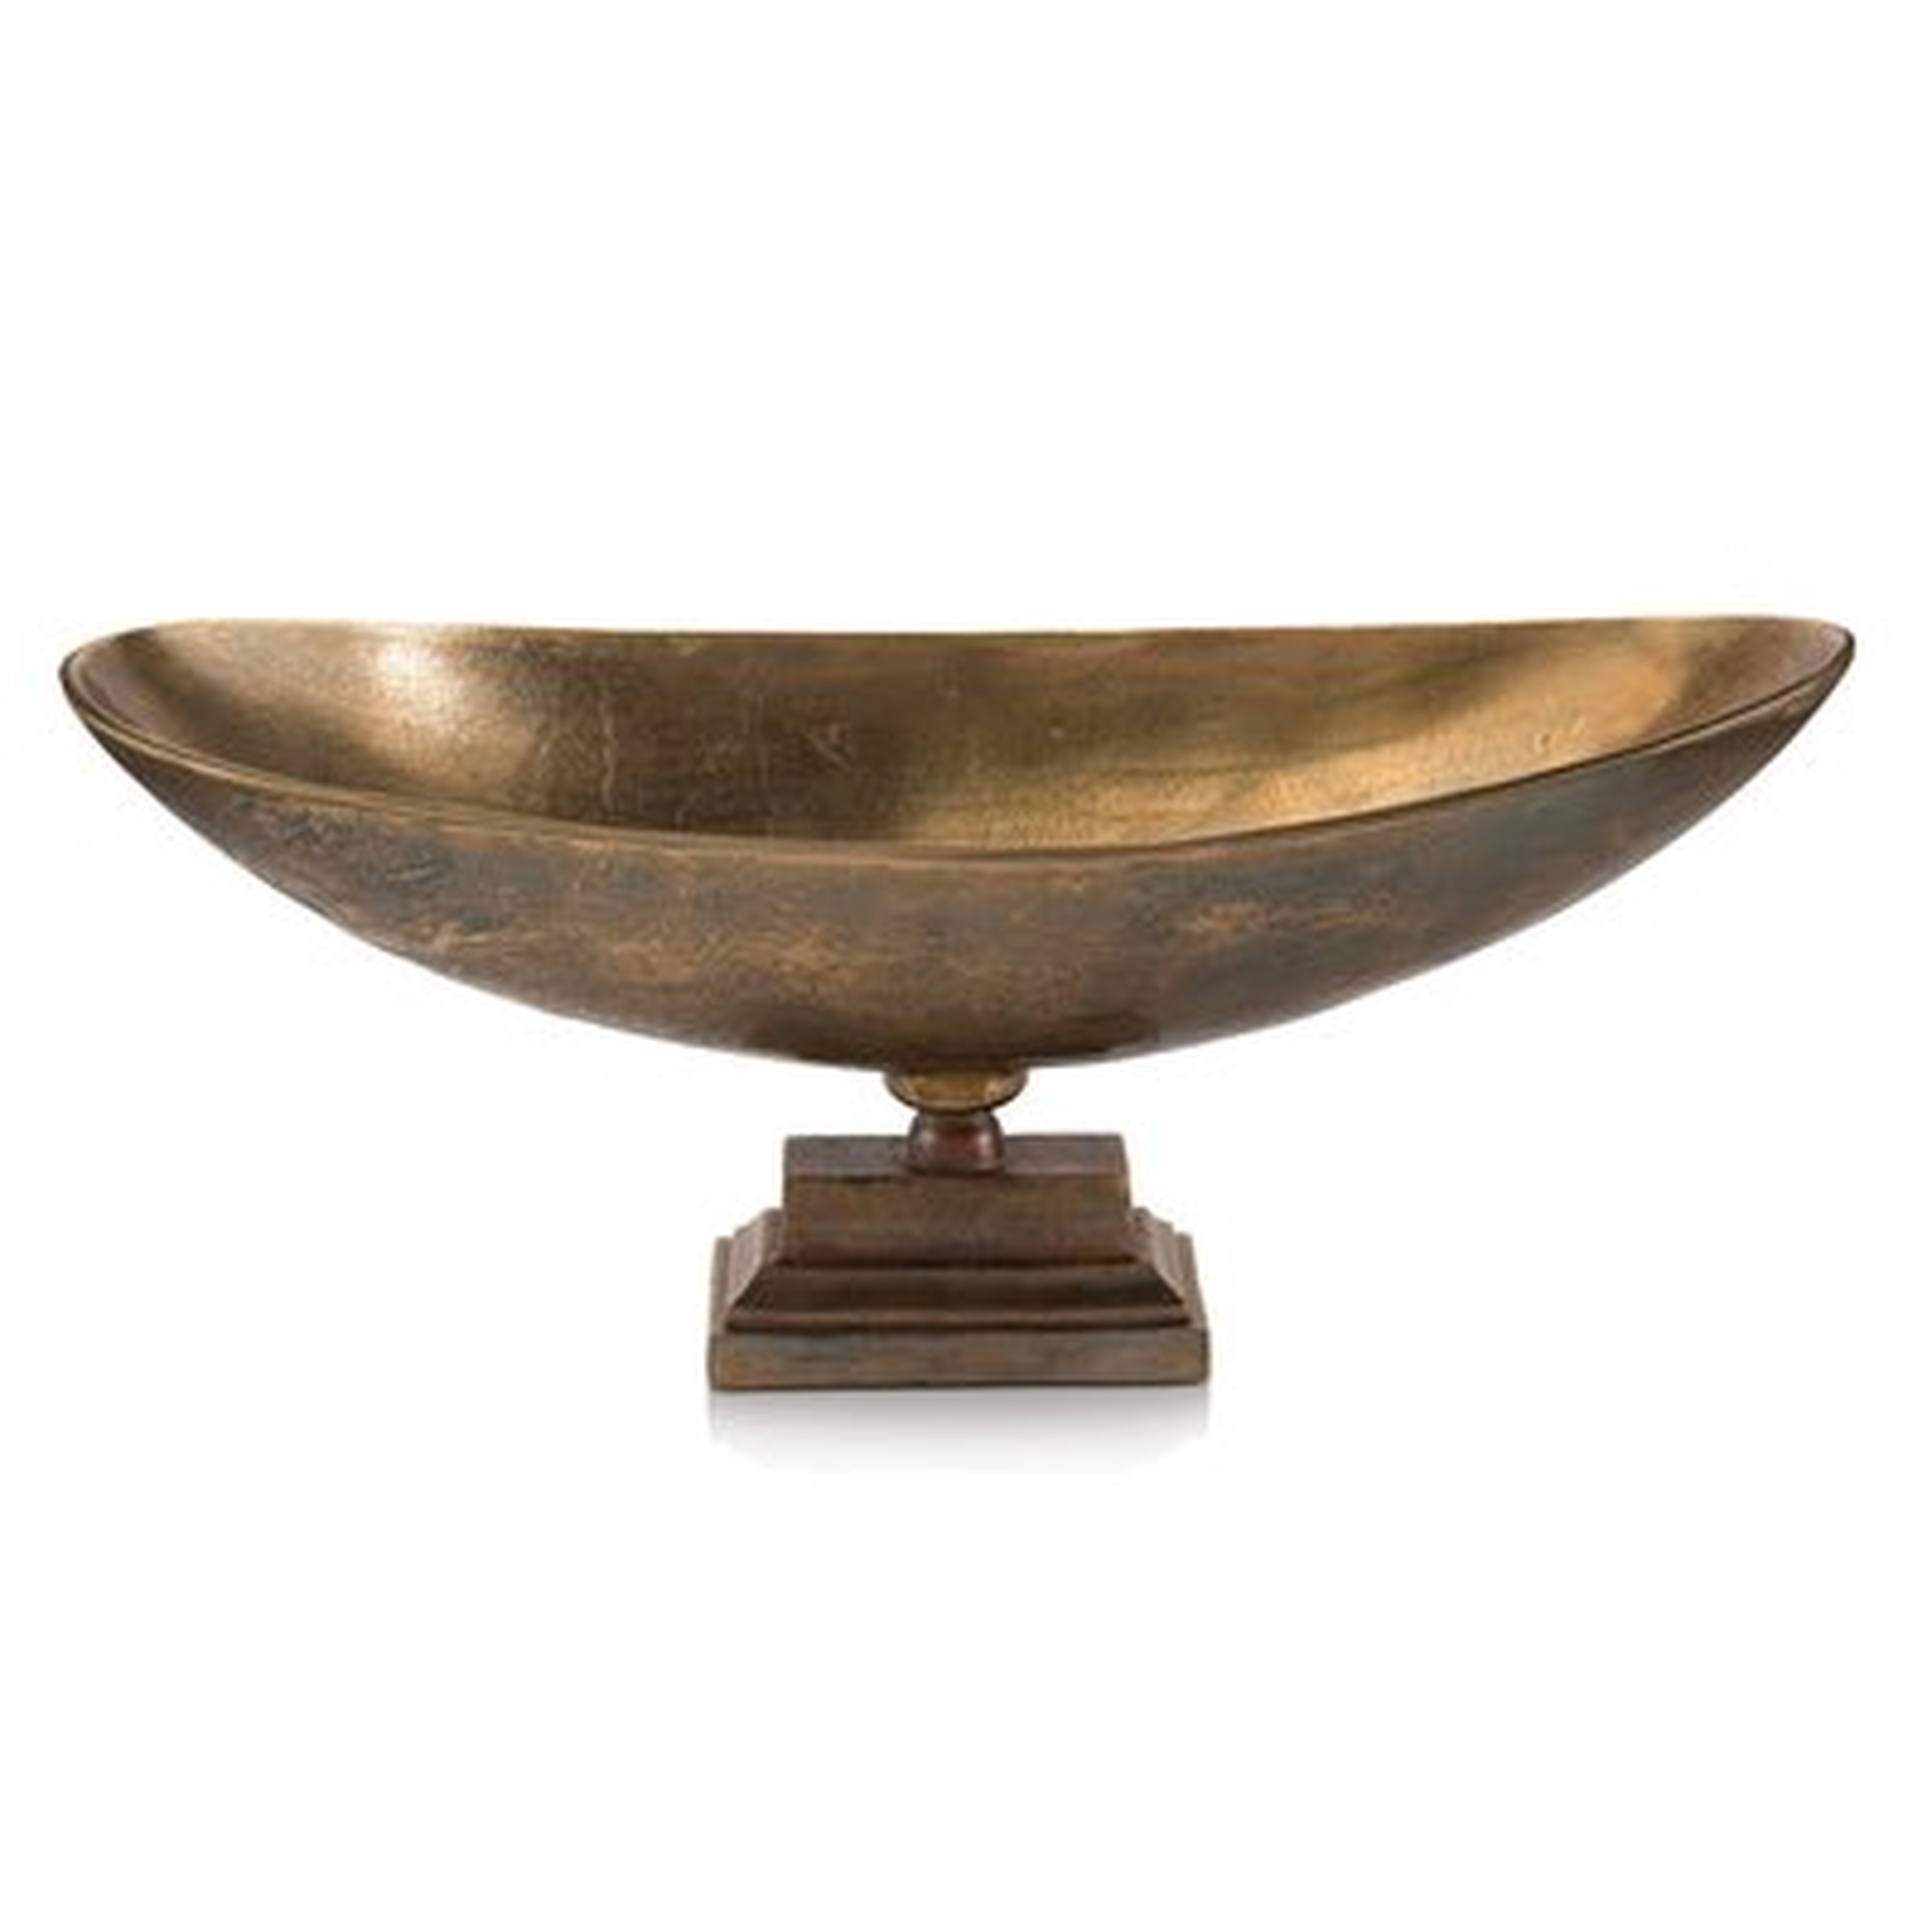 Boat-Shaped Compote - Wayfair